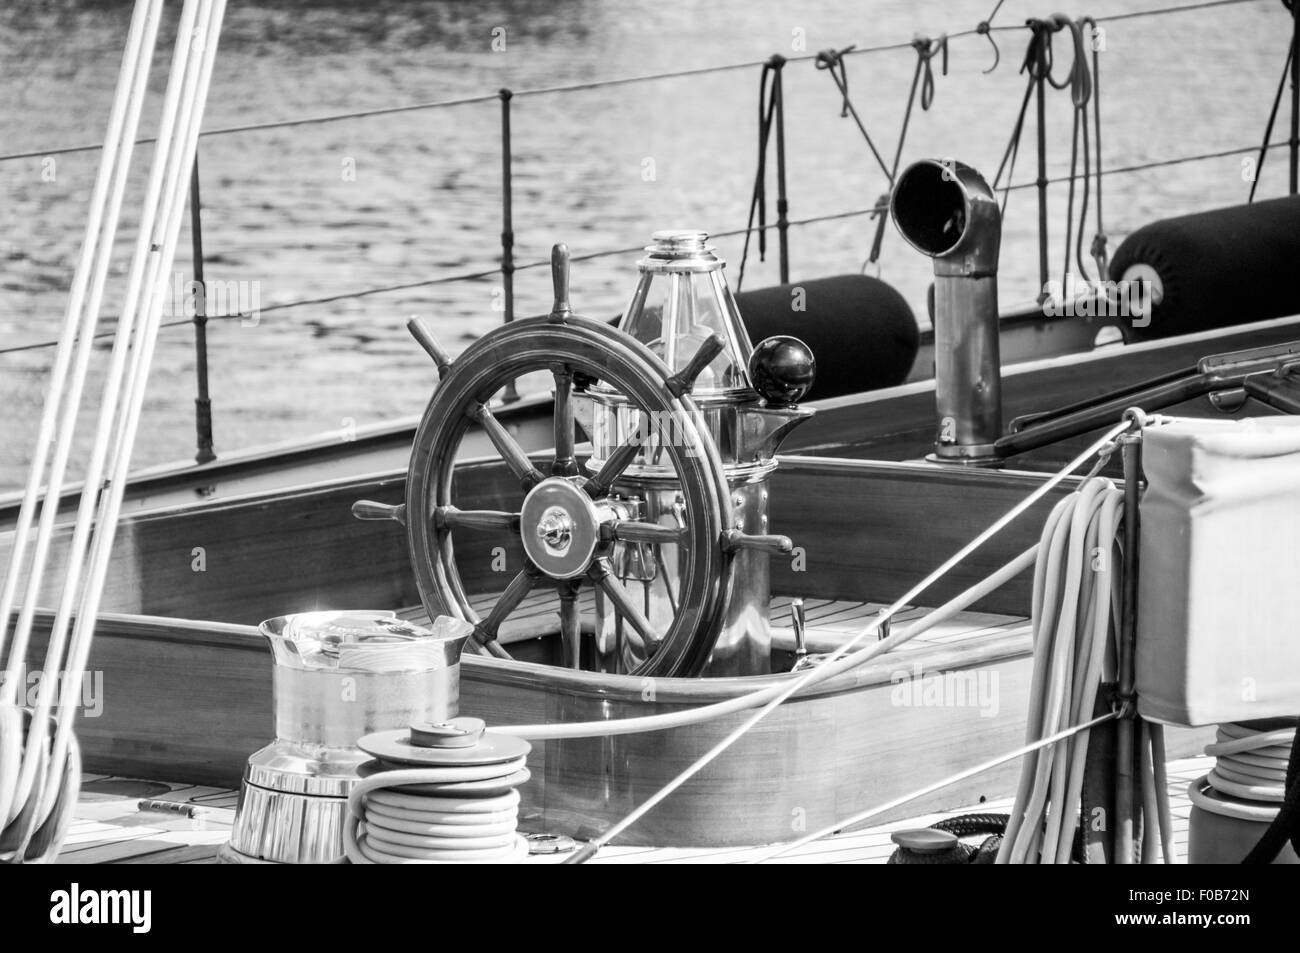 On the deck of an ancient luxury yacht, detailed view of the steering wheel surrounded by chords and other equipments Stock Photo